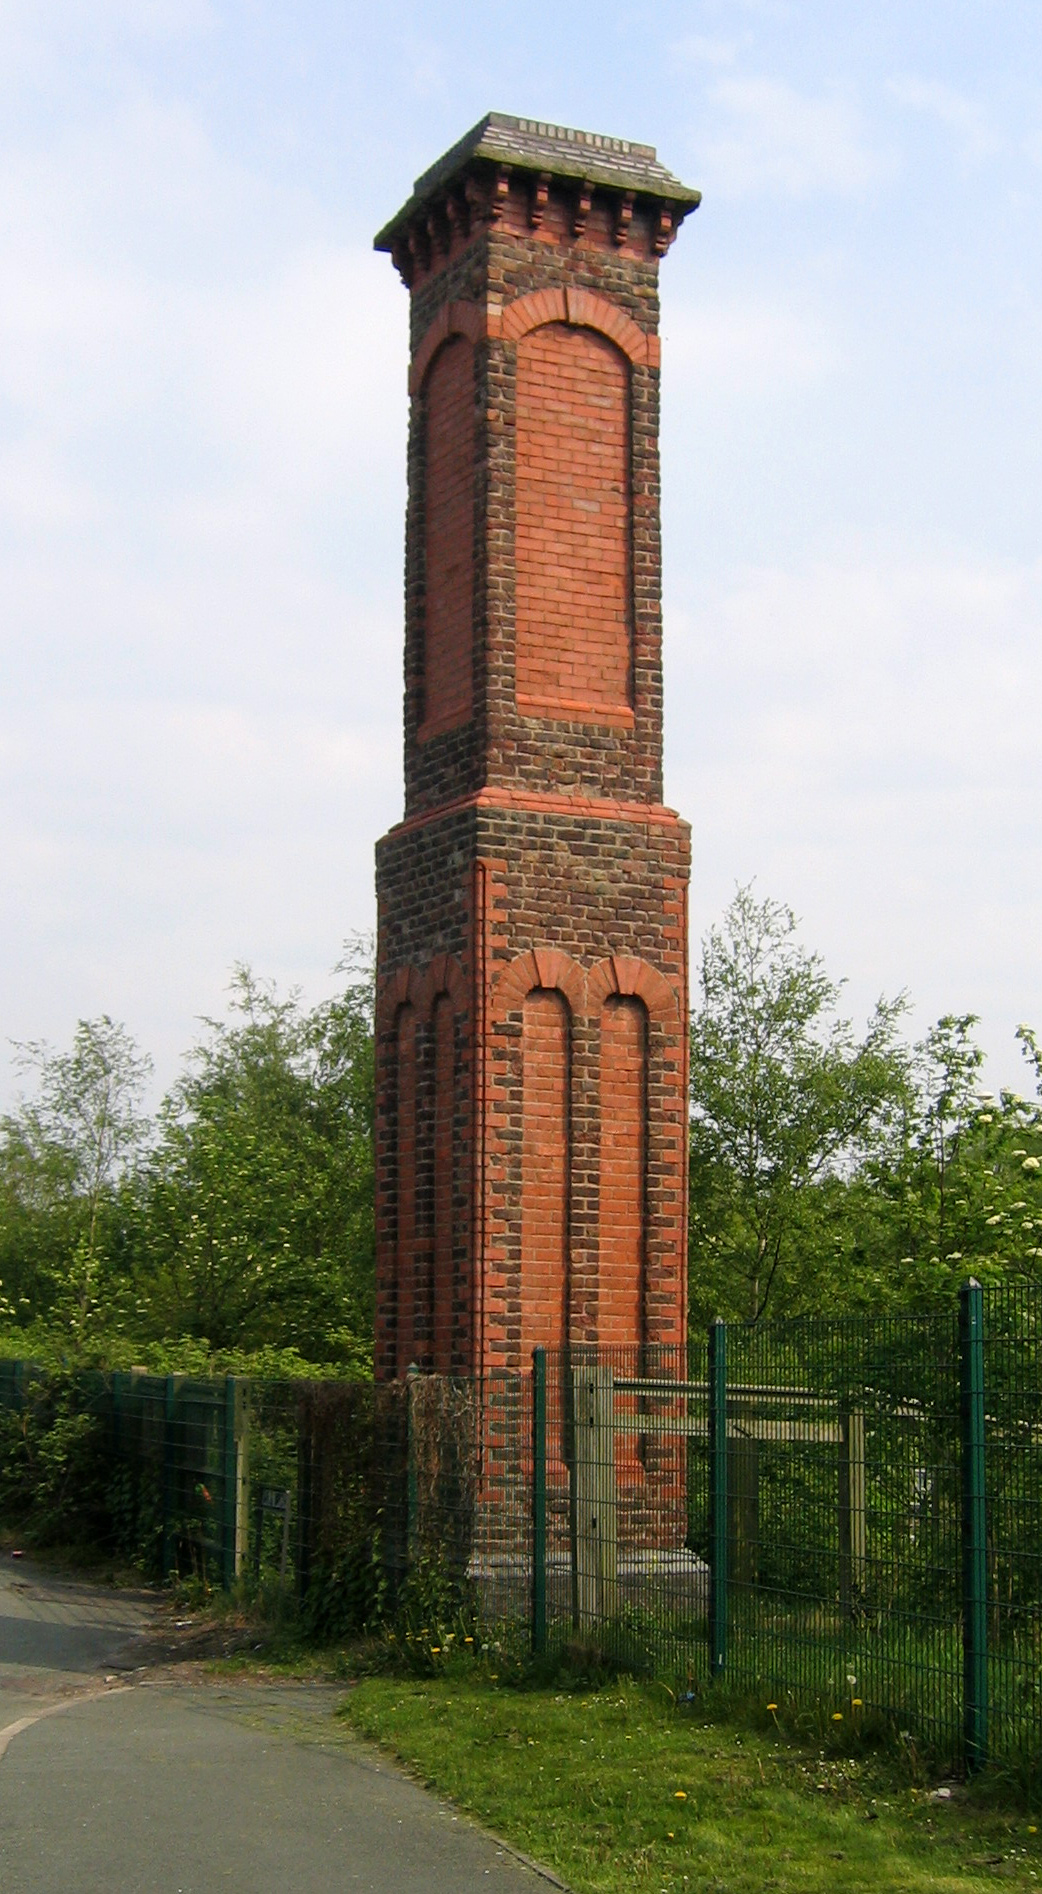 File:Widnes Sewer tower.jpg - Wikimedia Commons